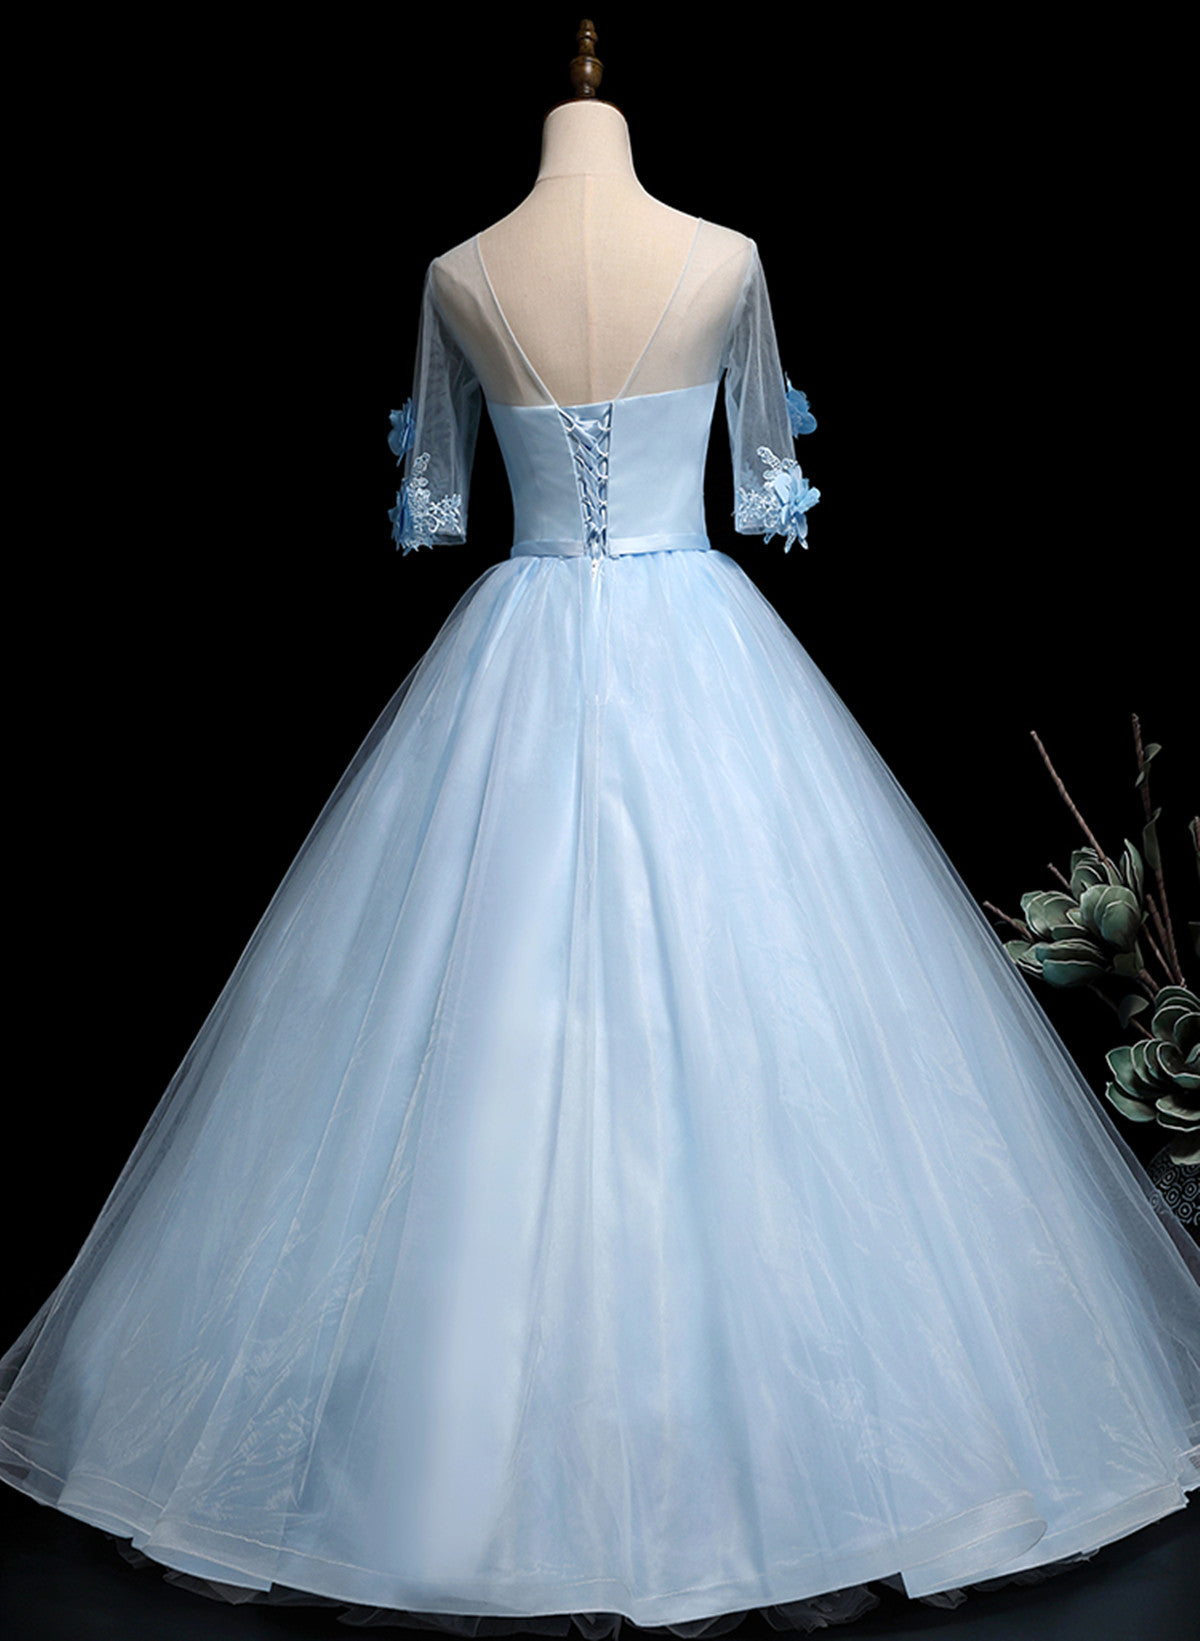 Light Blue Ball Gown with Sleeves Party Dress, Blue Sweet 16 Dress